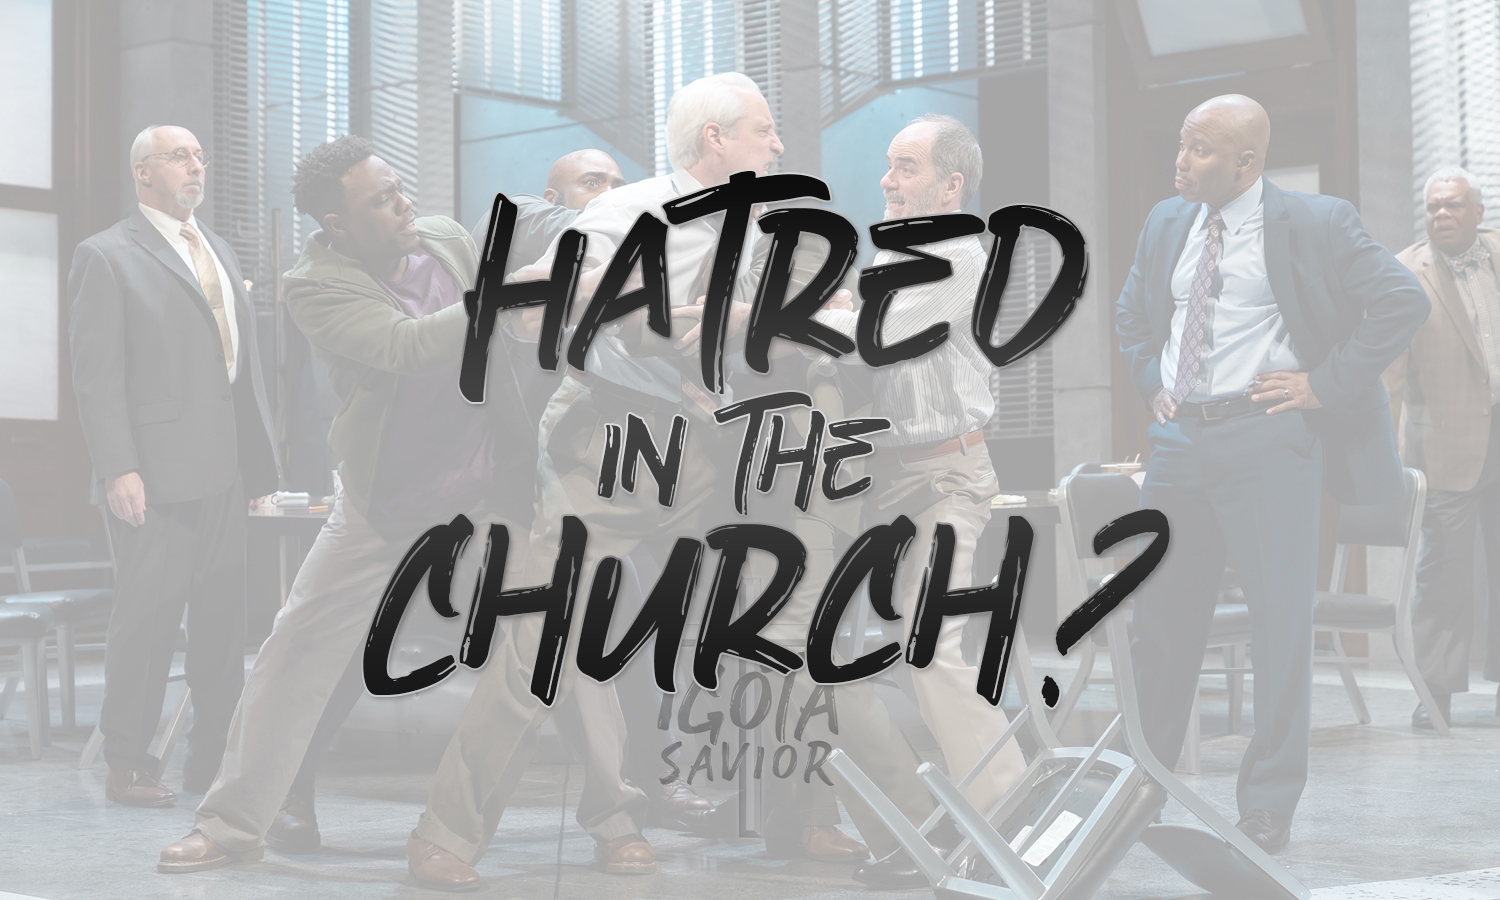 Hatred In The Church?